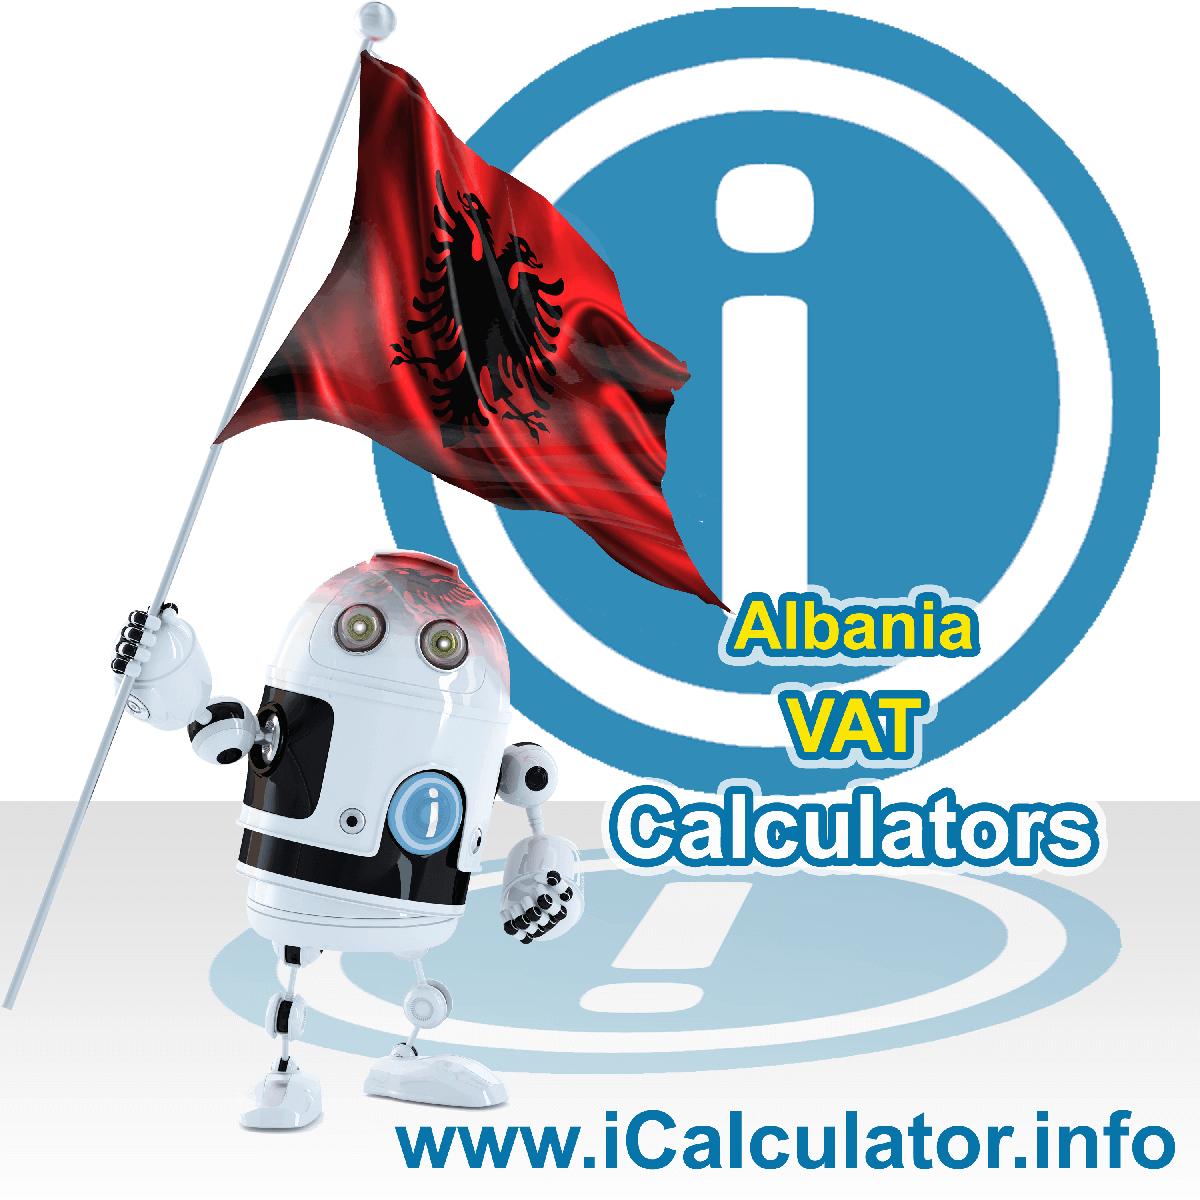 Albania VAT Calculator. This image shows the Albania flag and information relating to the VAT formula used for calculating Value Added Tax in Albania using the Albania VAT Calculator in 2023